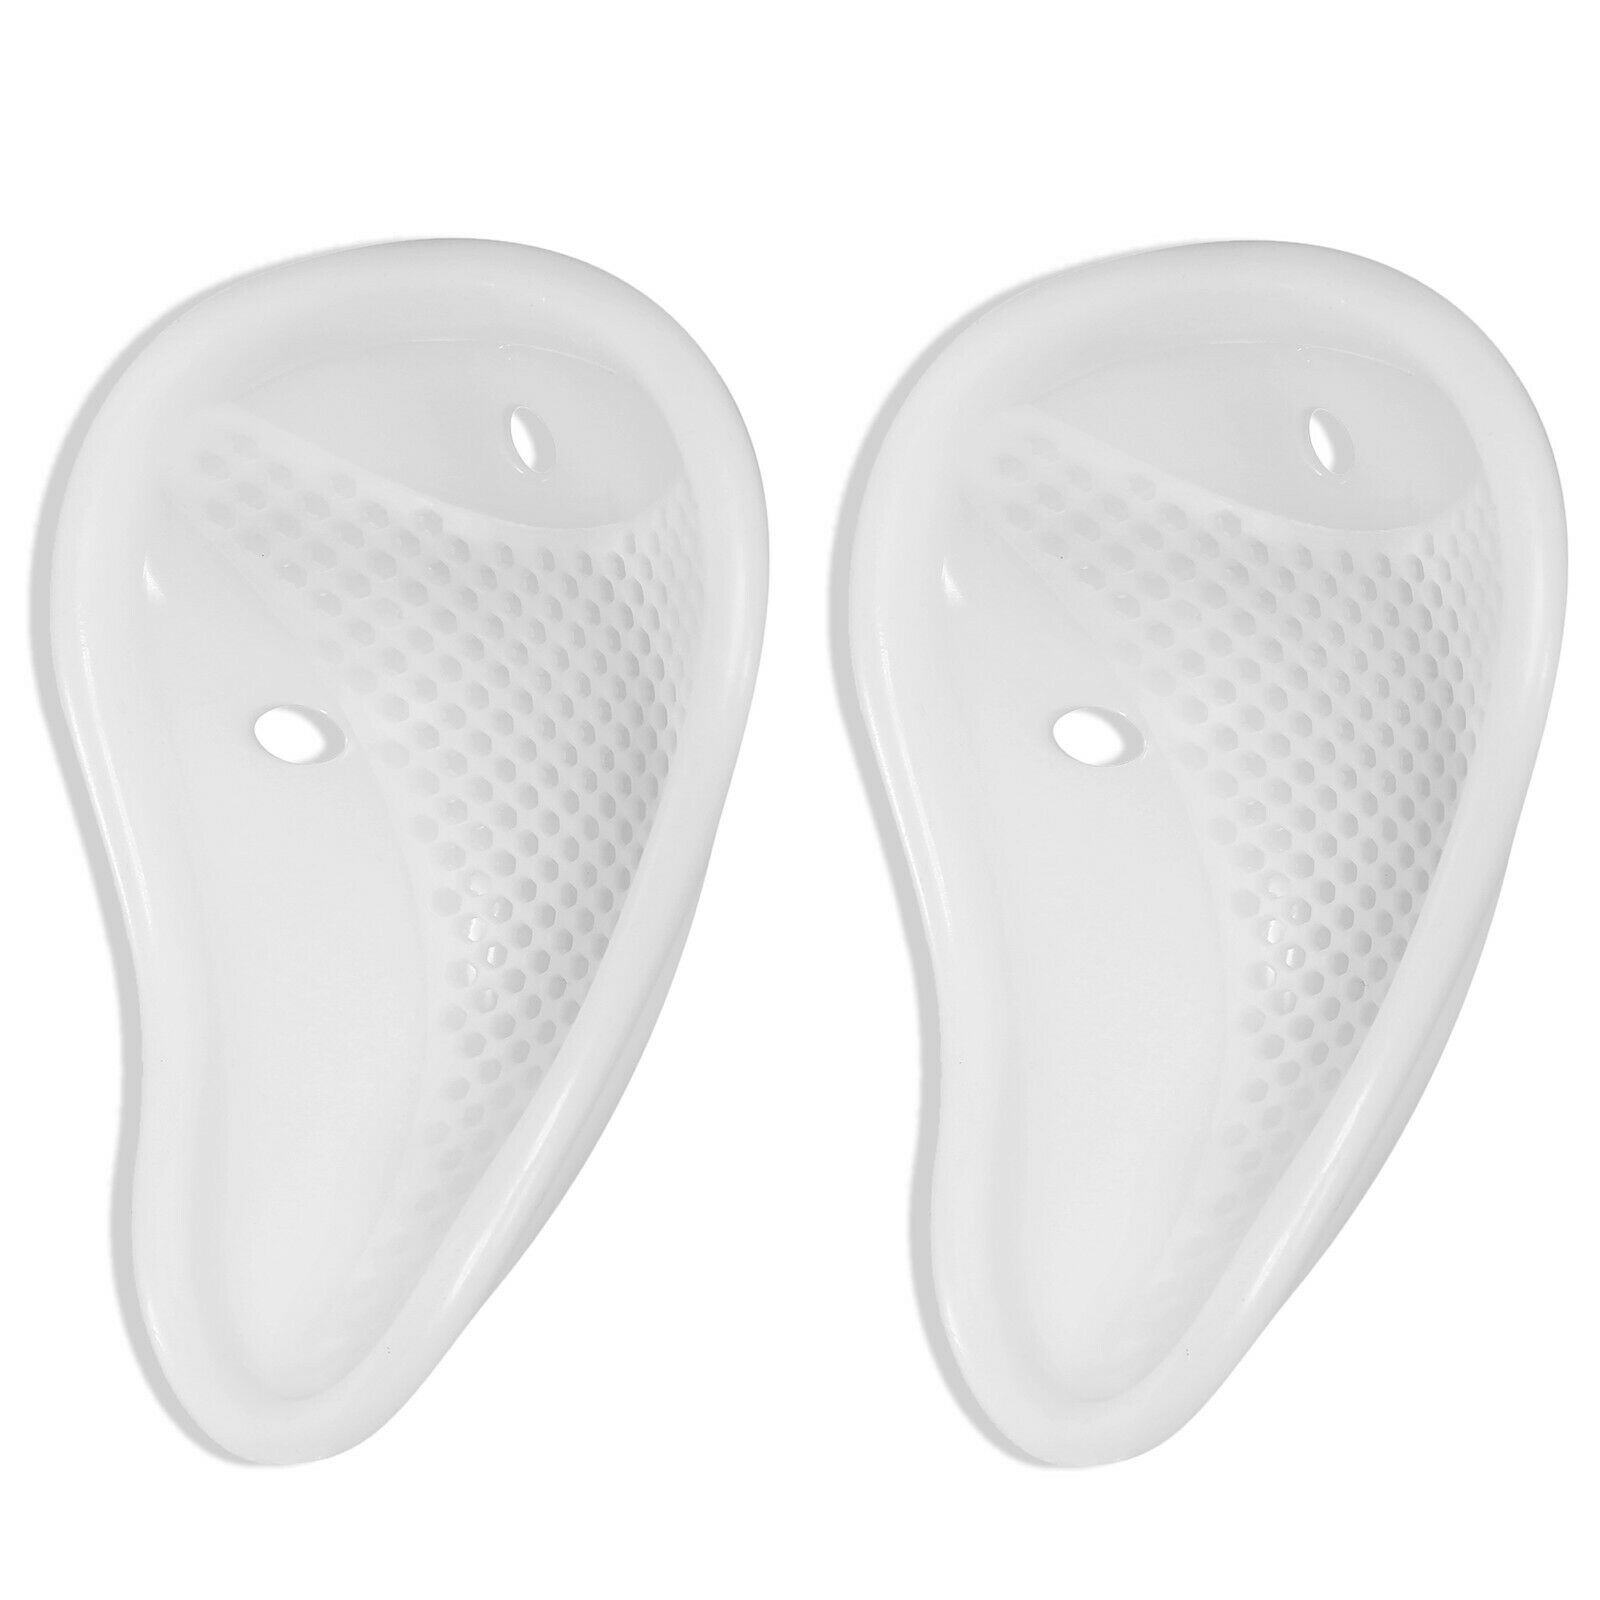 Athletic Groin Cup Protector Adult &youth By Elitetek - 1 Pack Or 2 Pack